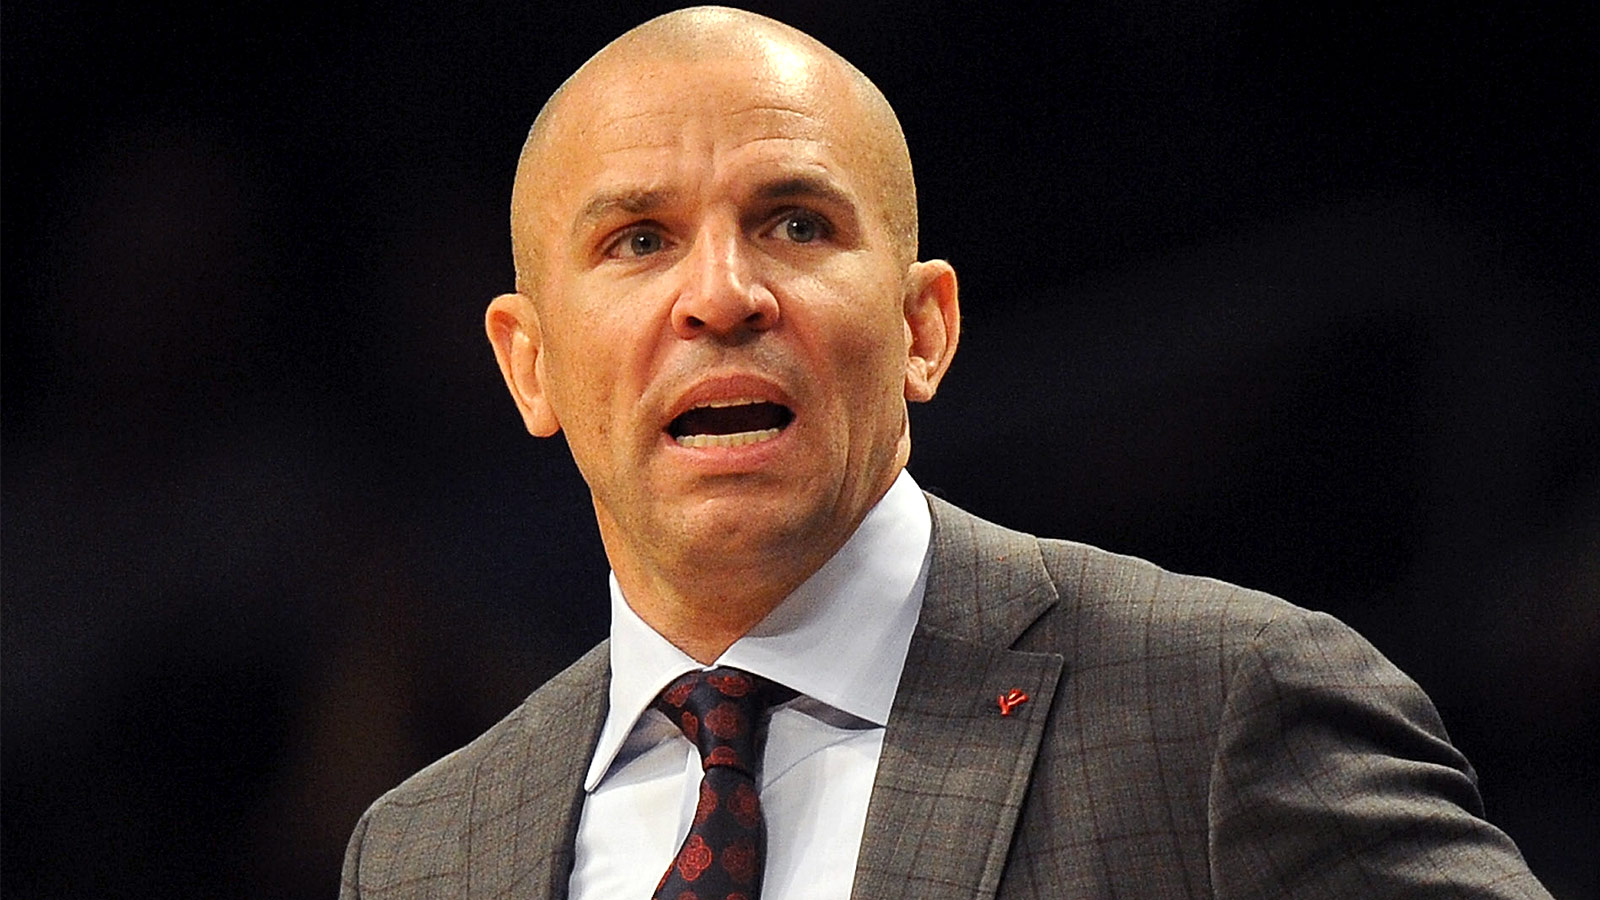 Jason Kidd: Being True To His Narcissistic Self - Psychology of Sports and More1600 x 900